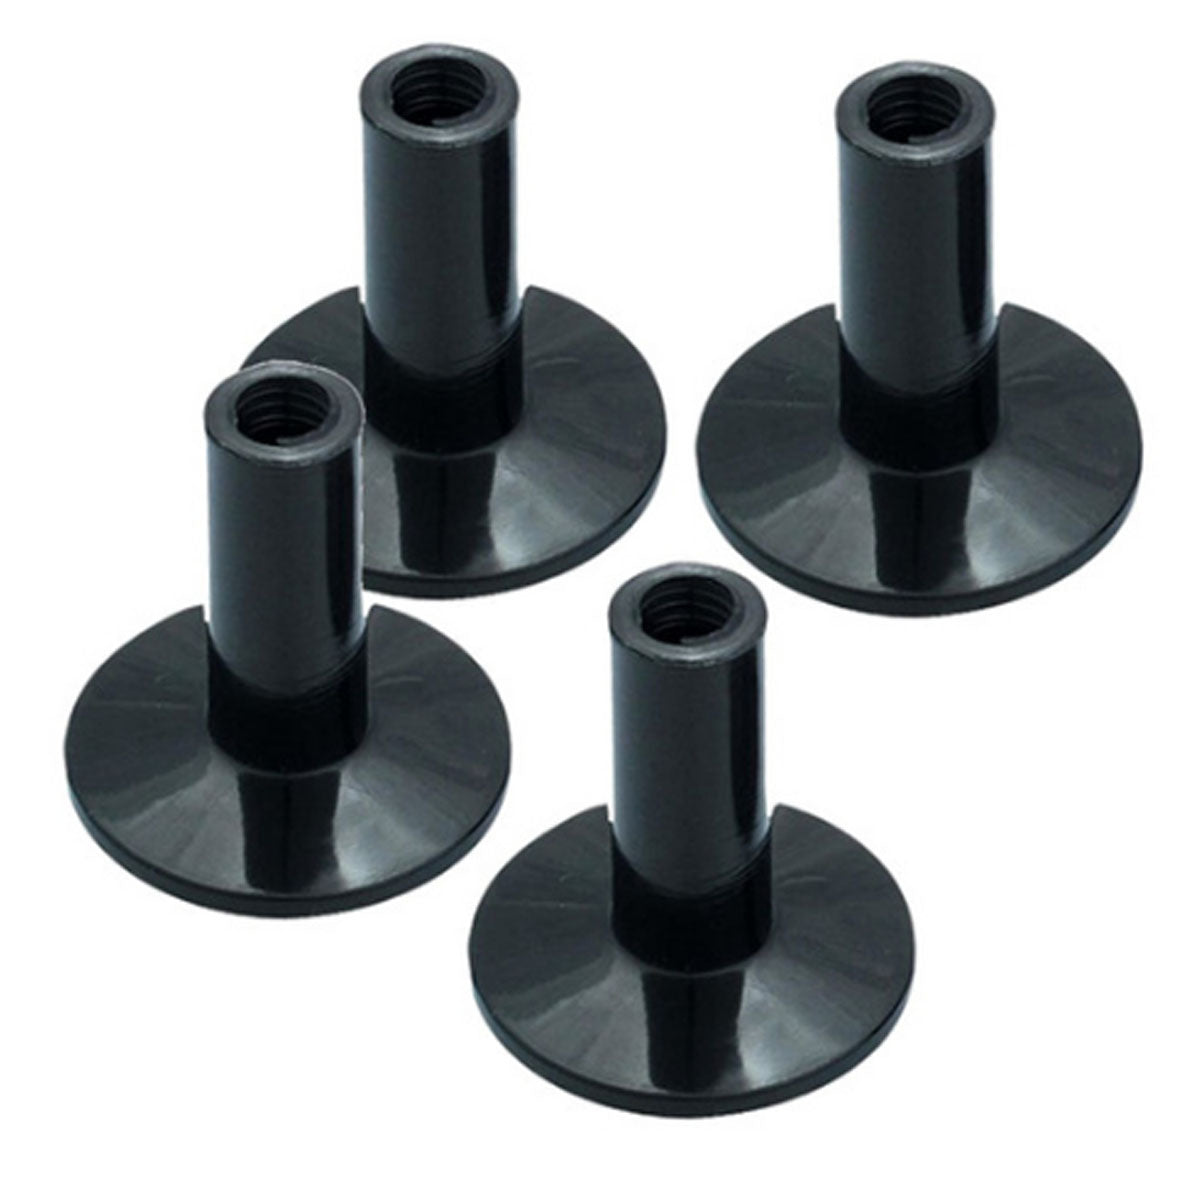 Dixon 8mm Flanged Base Tall Cymbal Sleeve (4 Pack) - PSYV19DHP